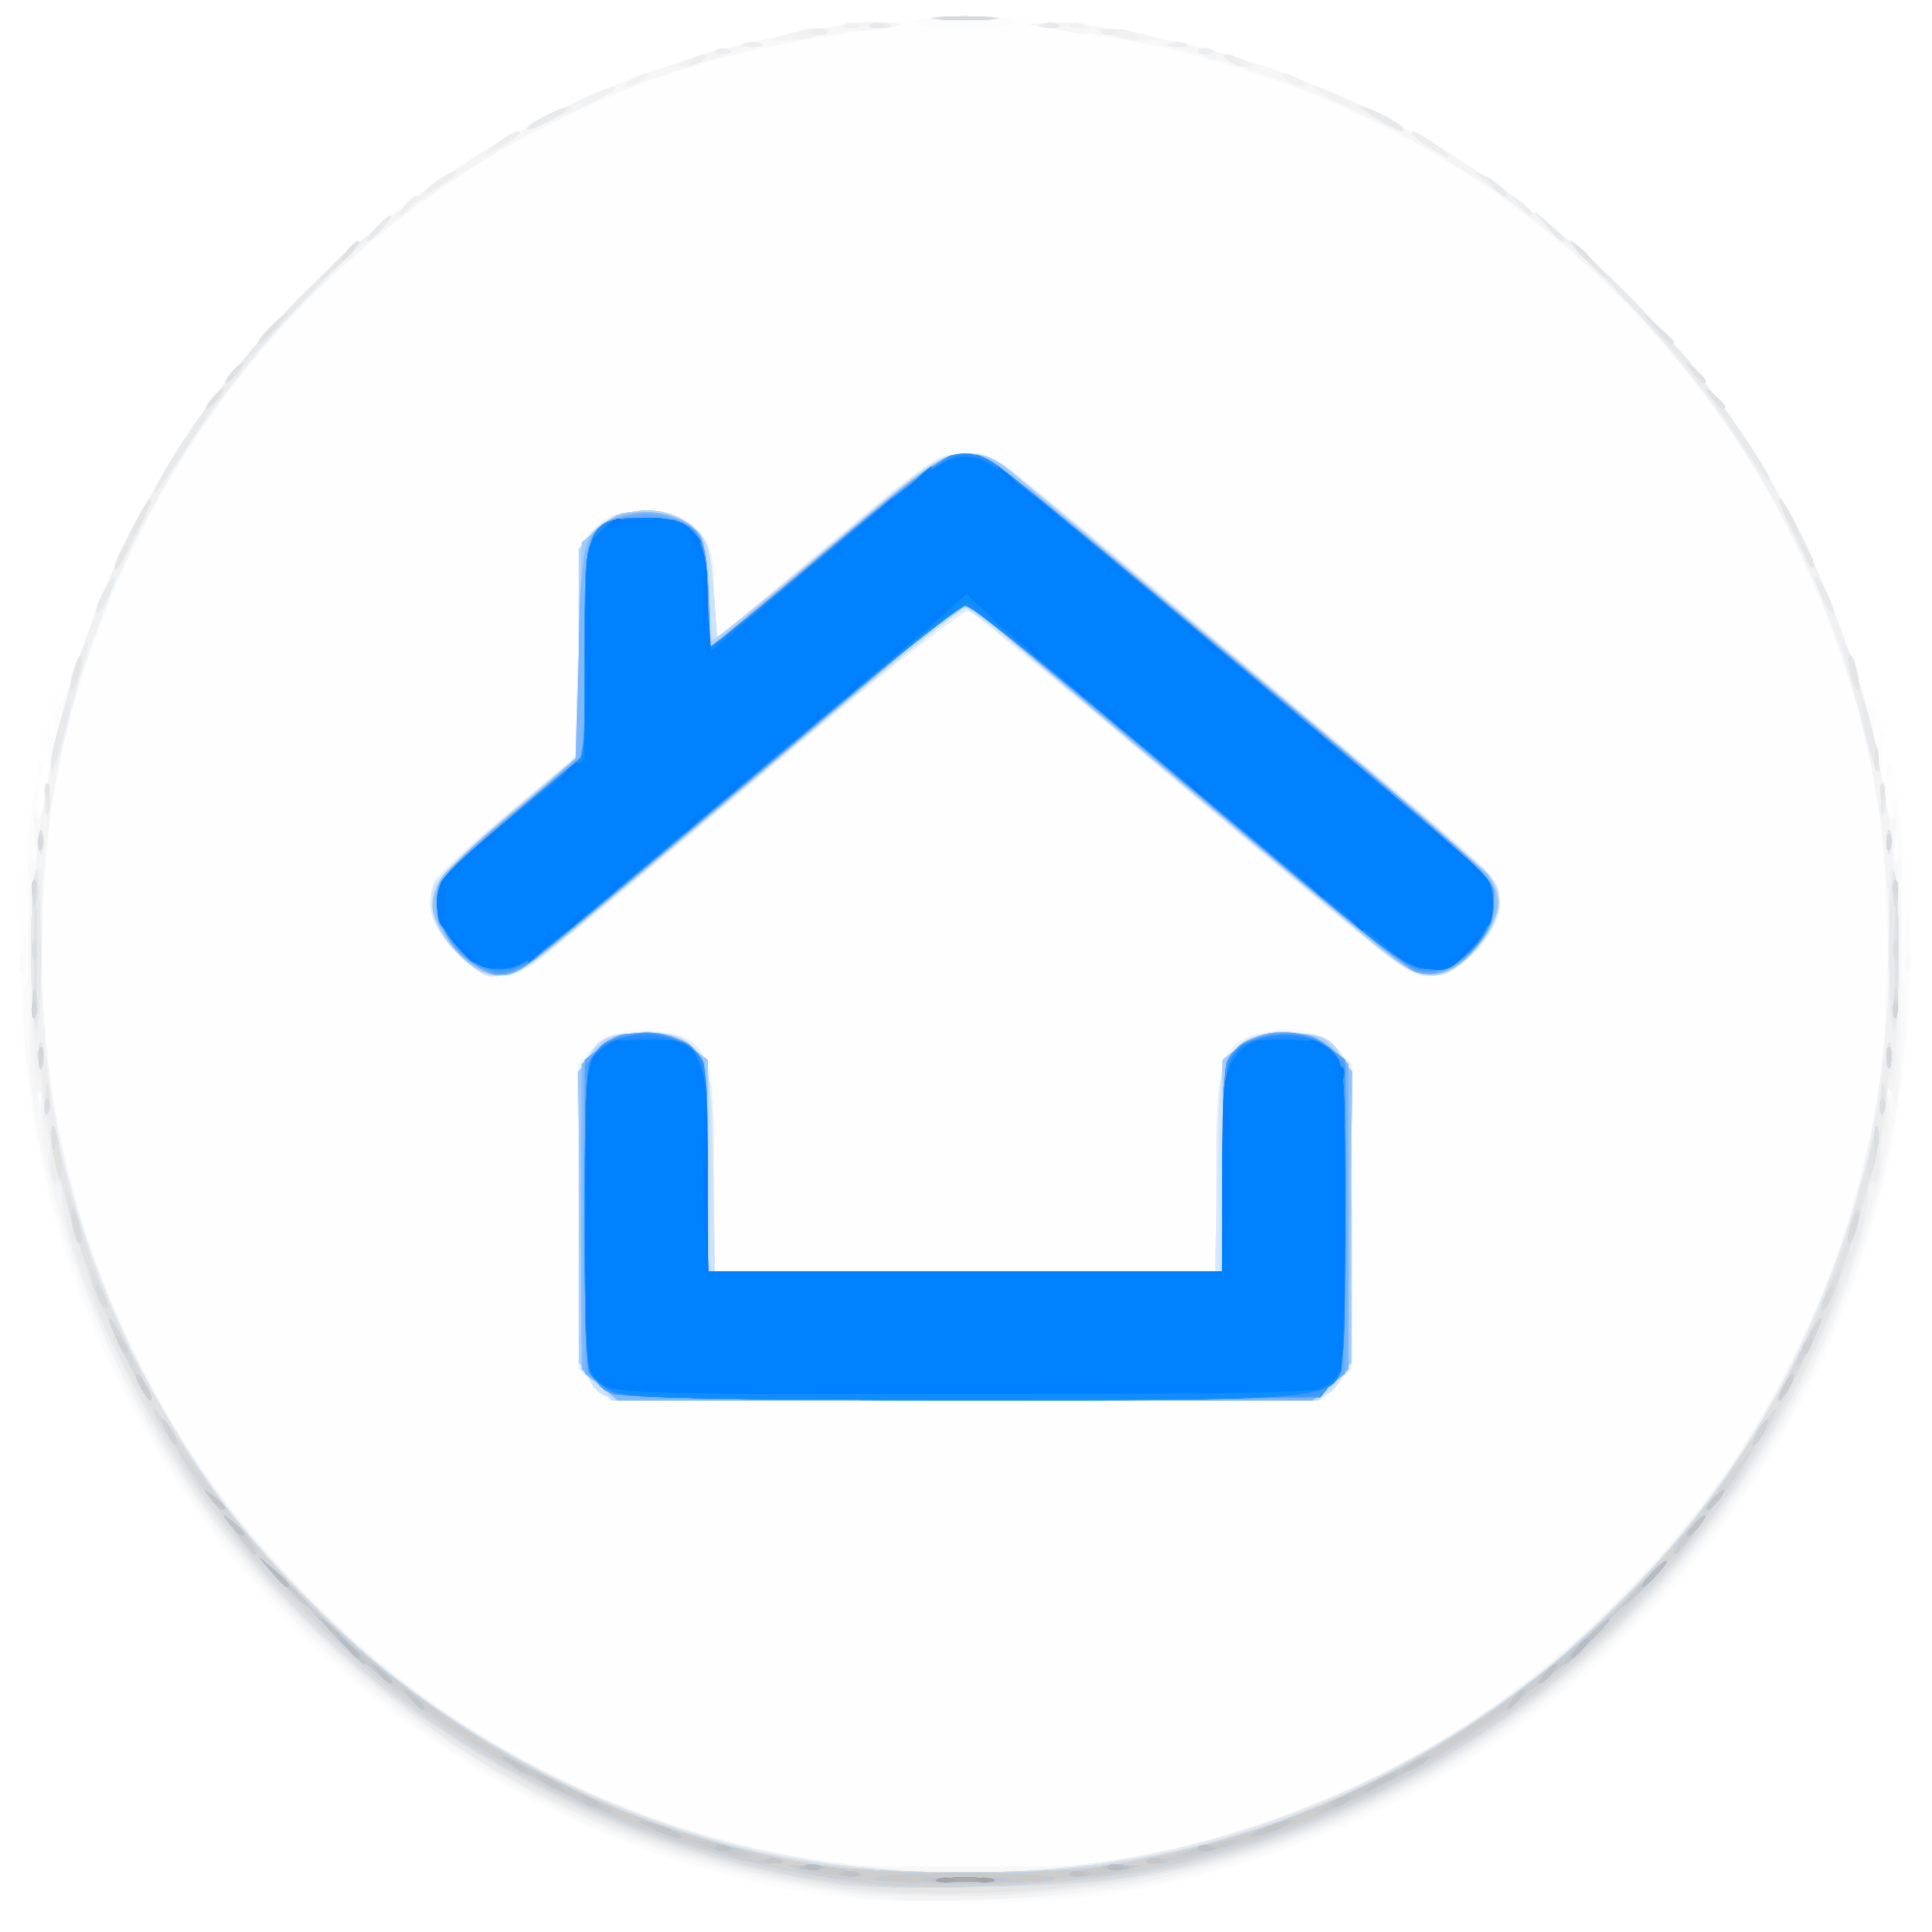 Home Logo - File:Facebook Home logo.svg - Wikimedia Commons